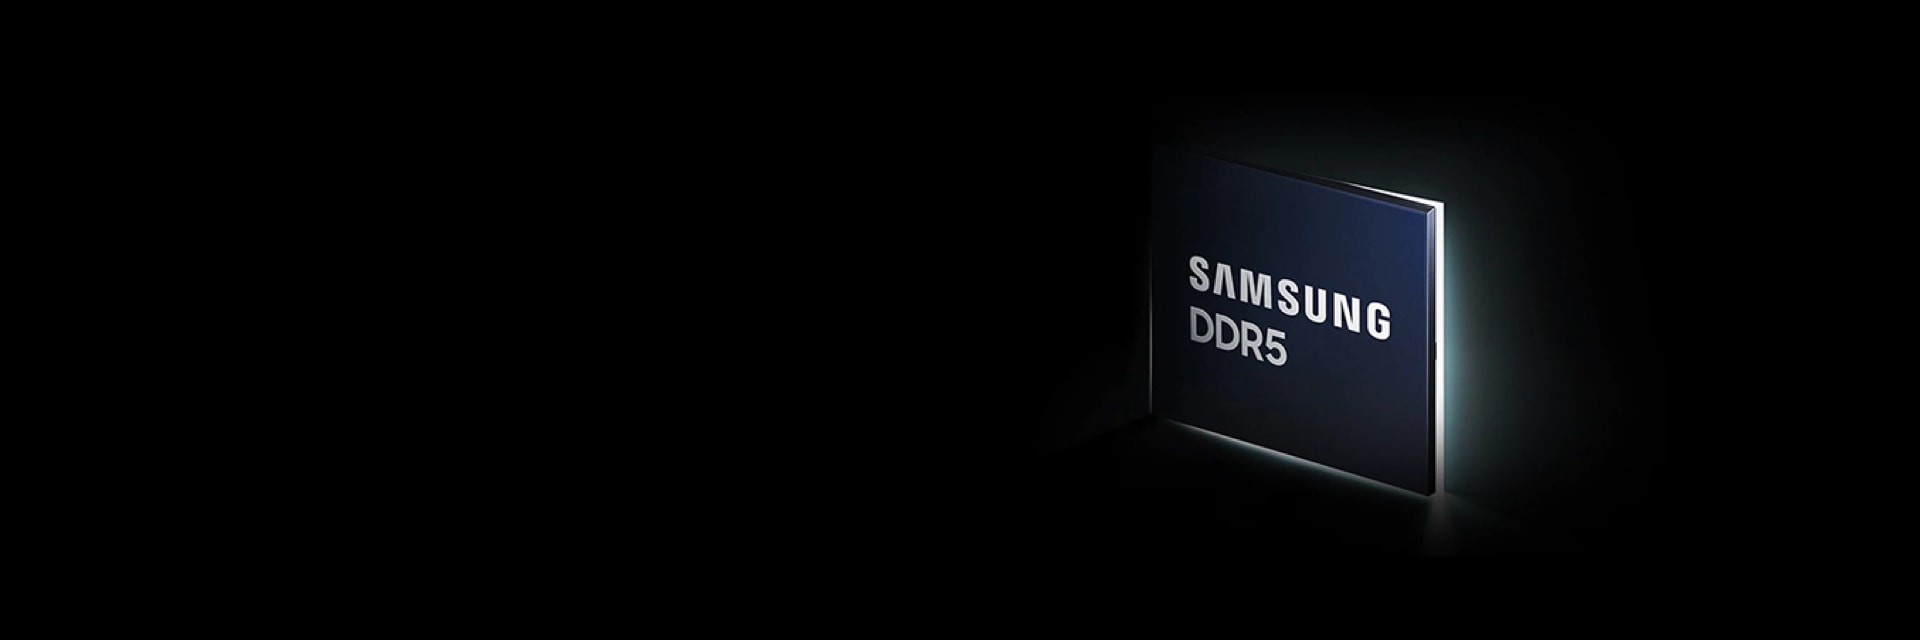 Samsung Semiconductor's DDR5 product in DRAM